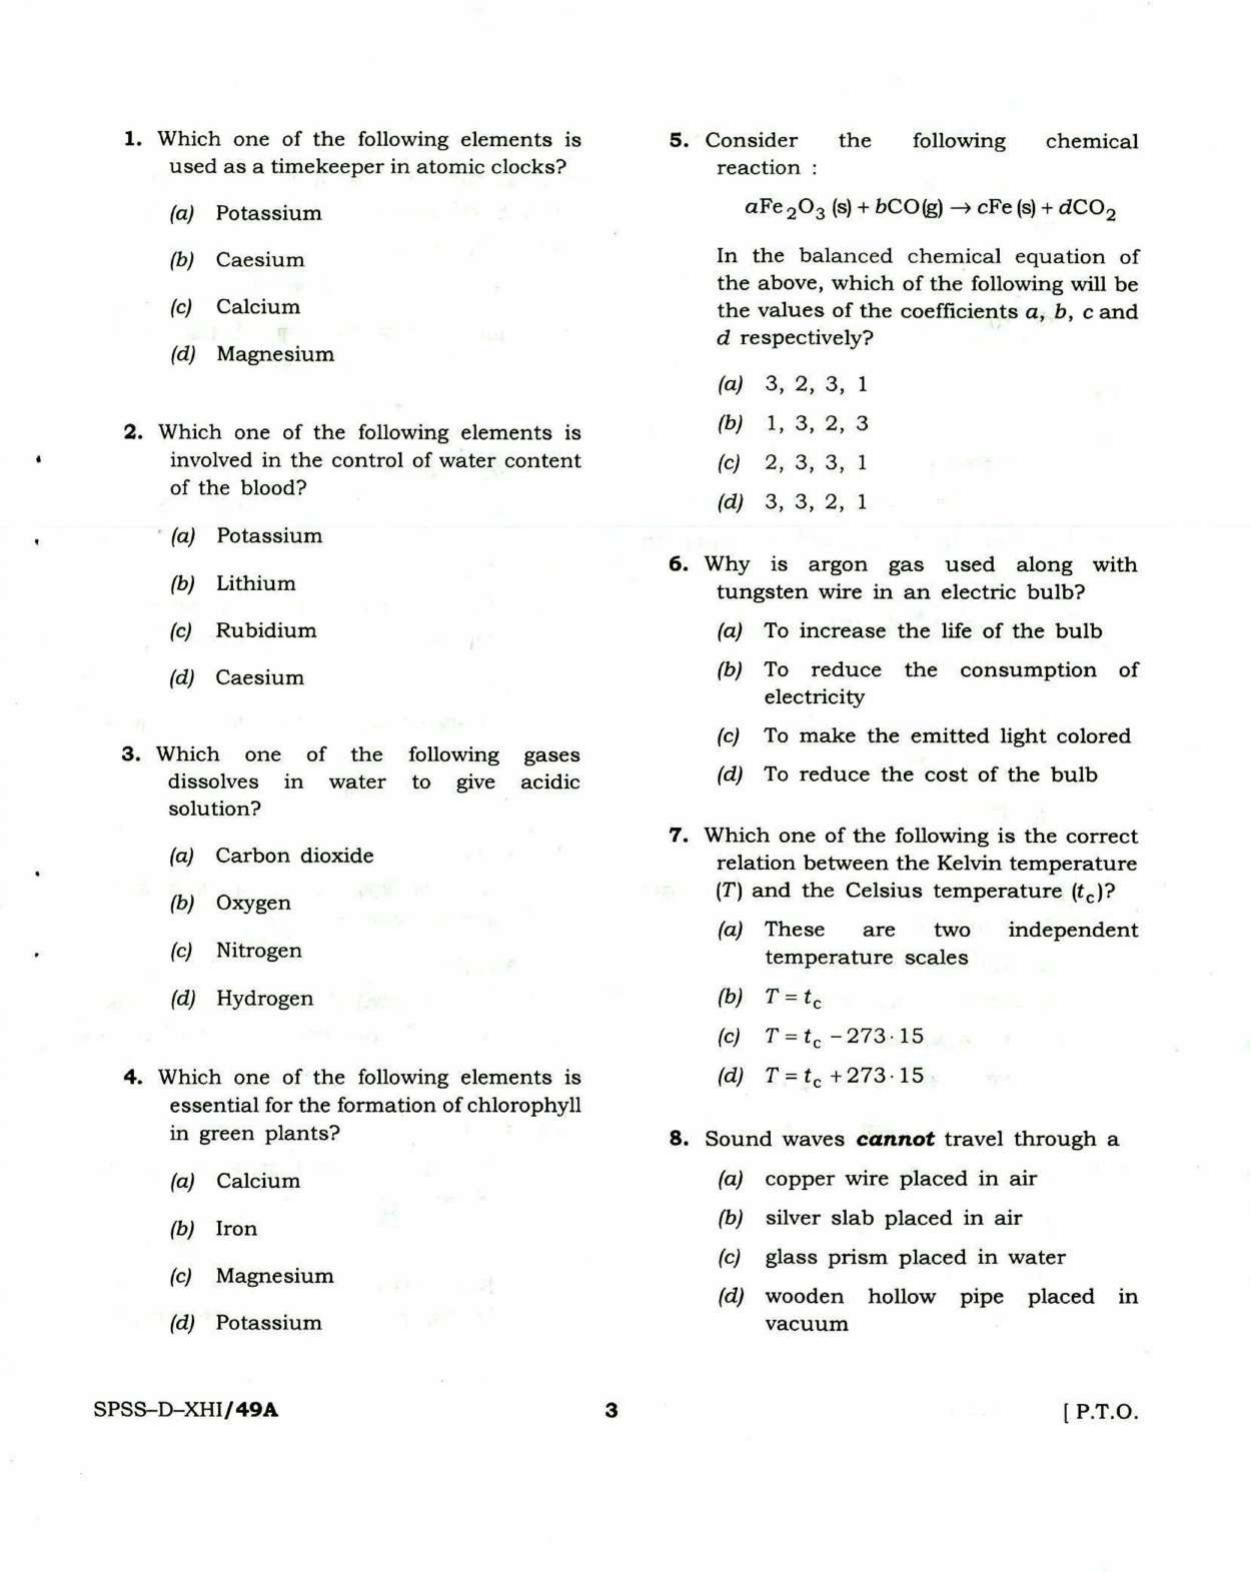 PBSSD General Knowledge Solved Papers - Page 3